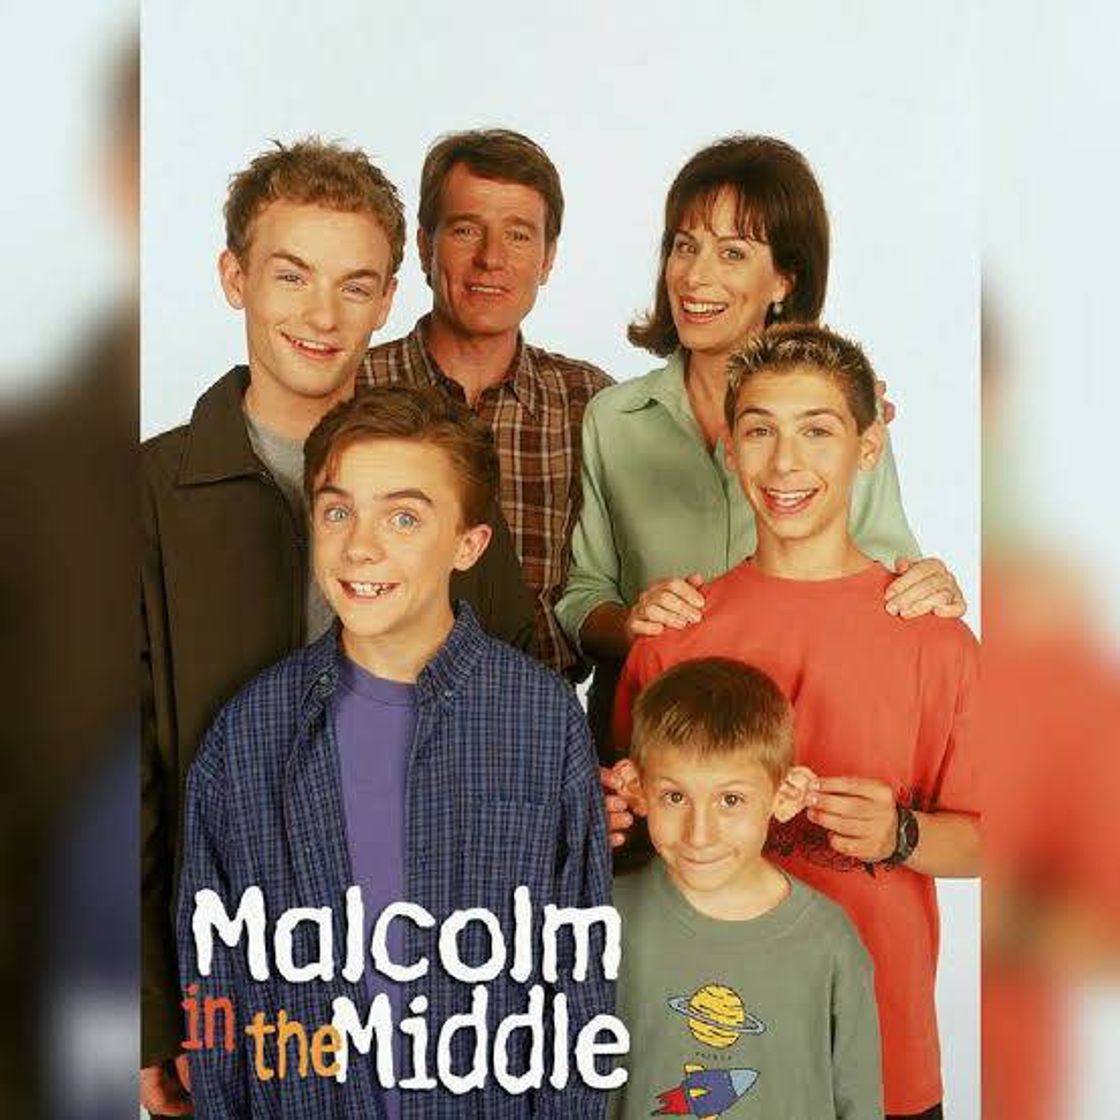 Malcom in the middle